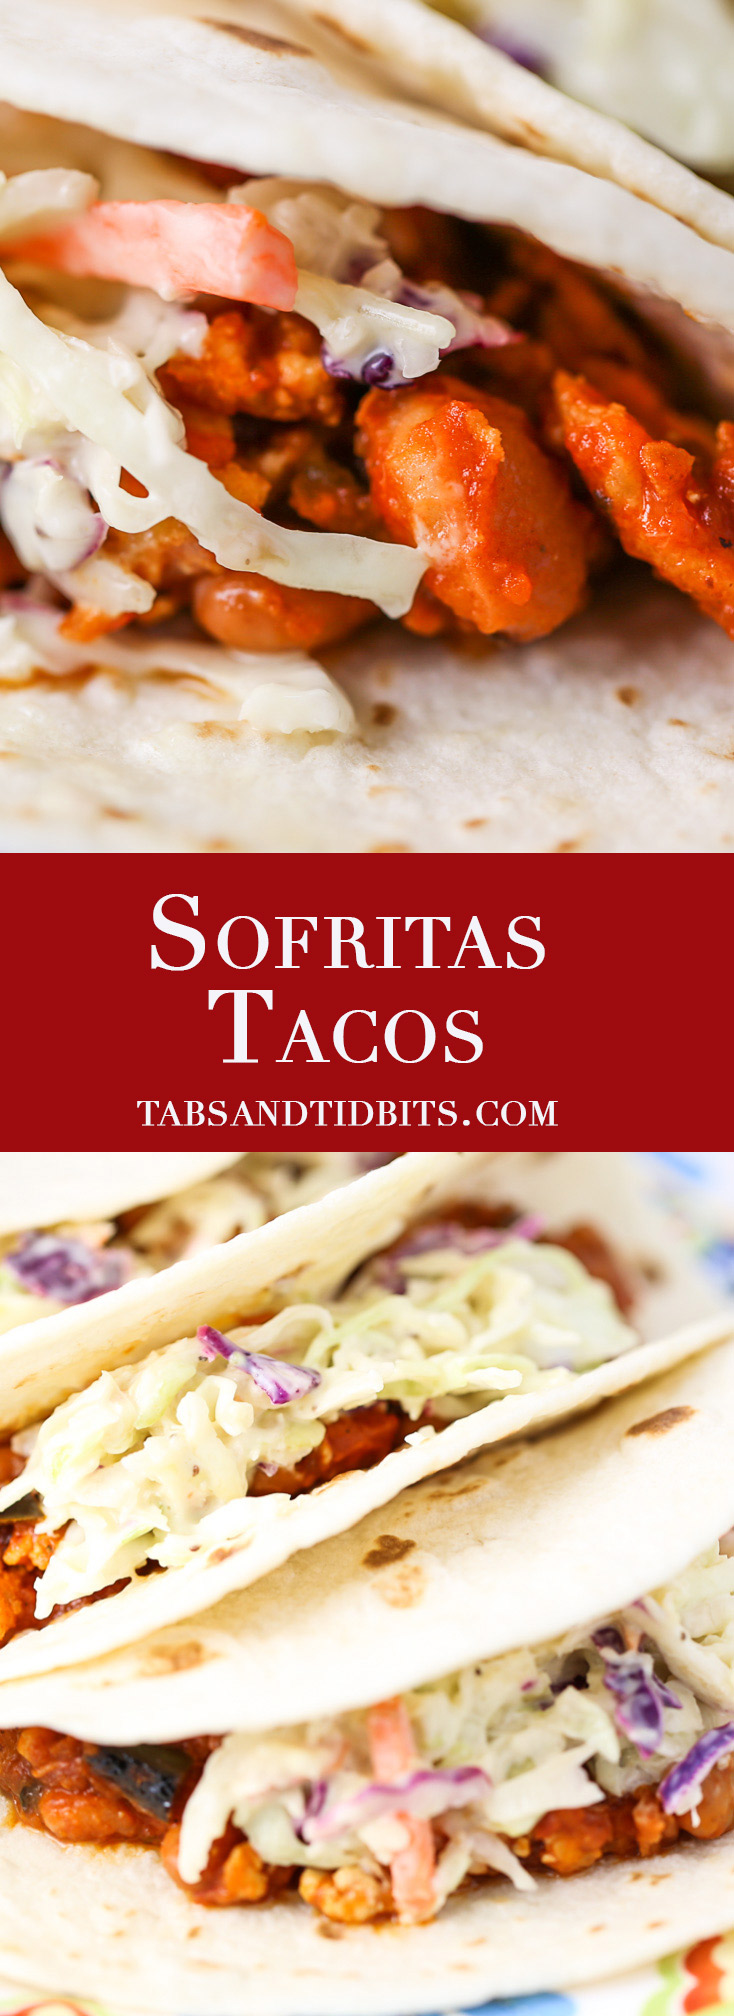 Sofritas Tacos - Spicy and flavorful tofu grounds and beans wrapped in soft flour tortillas and topped with cool and crisp coleslaw!